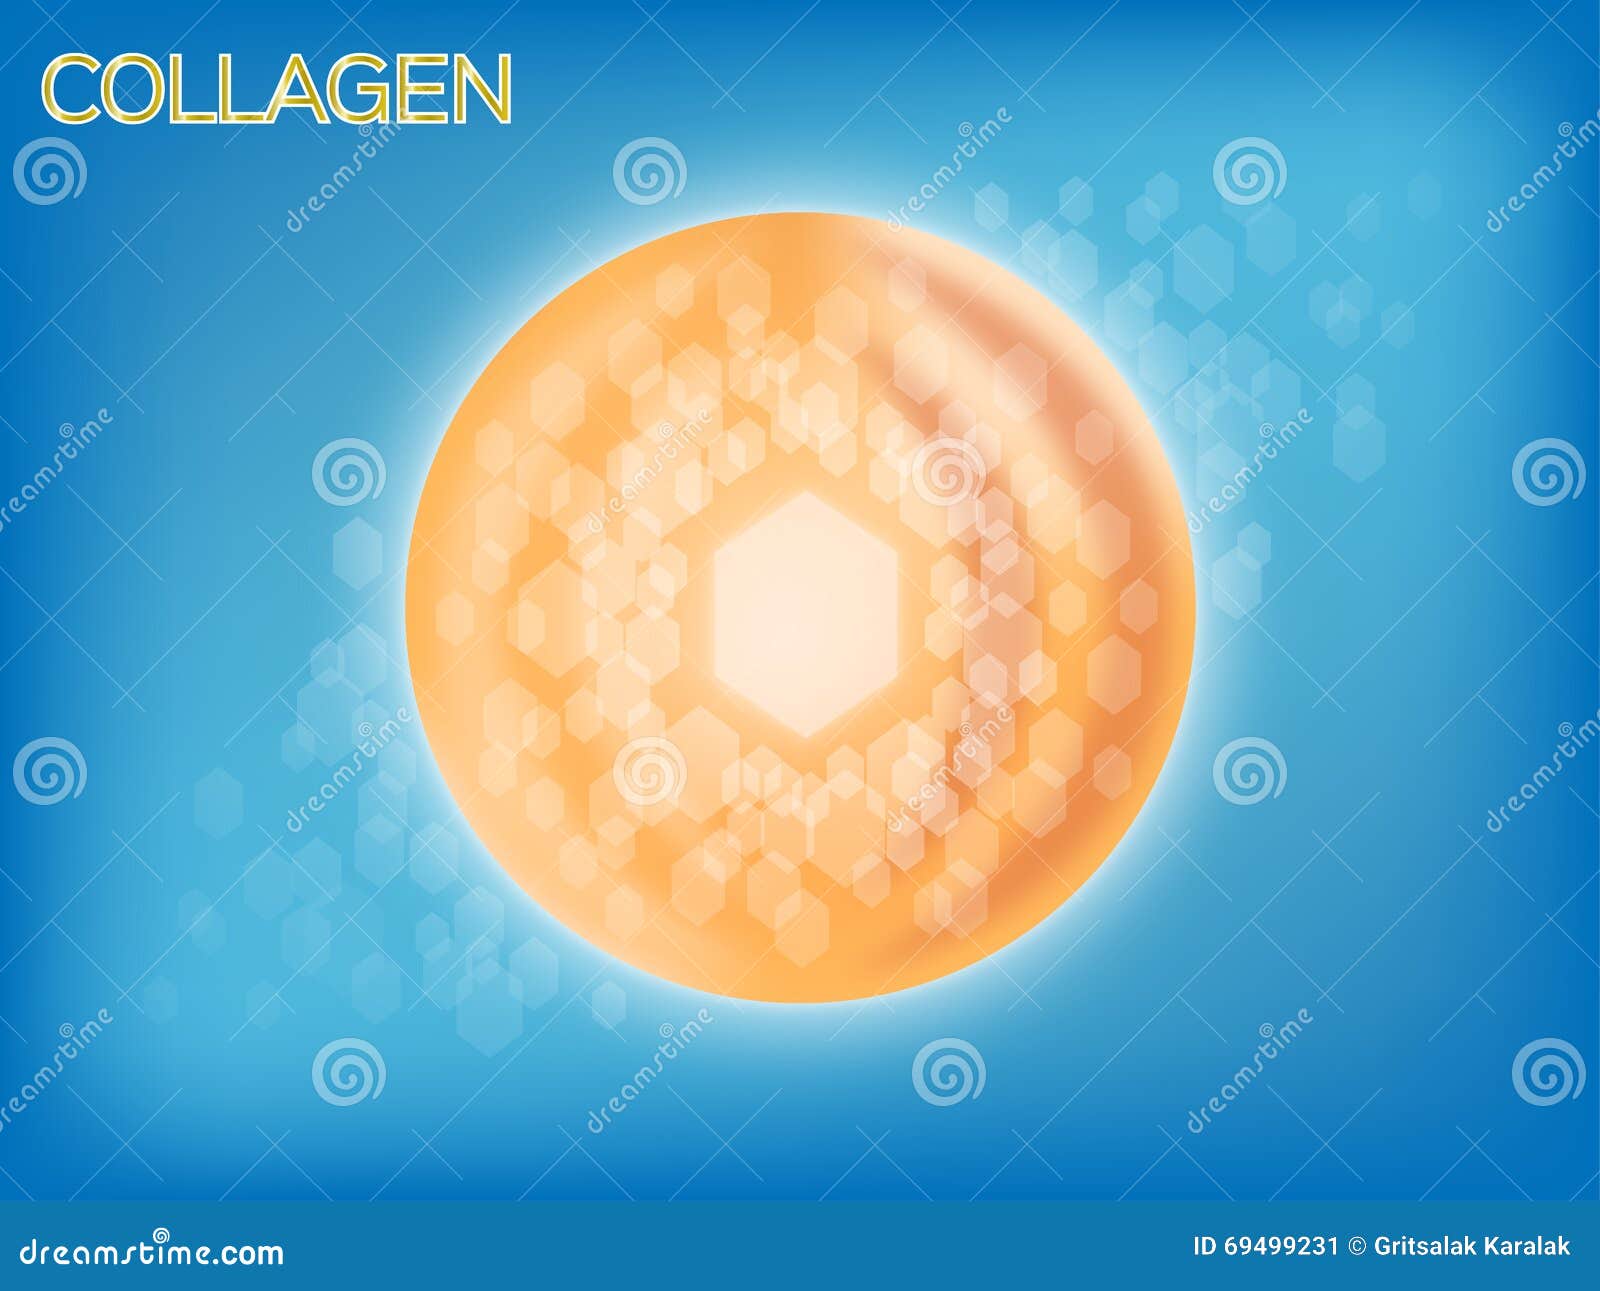 collagen and cell graphic inside